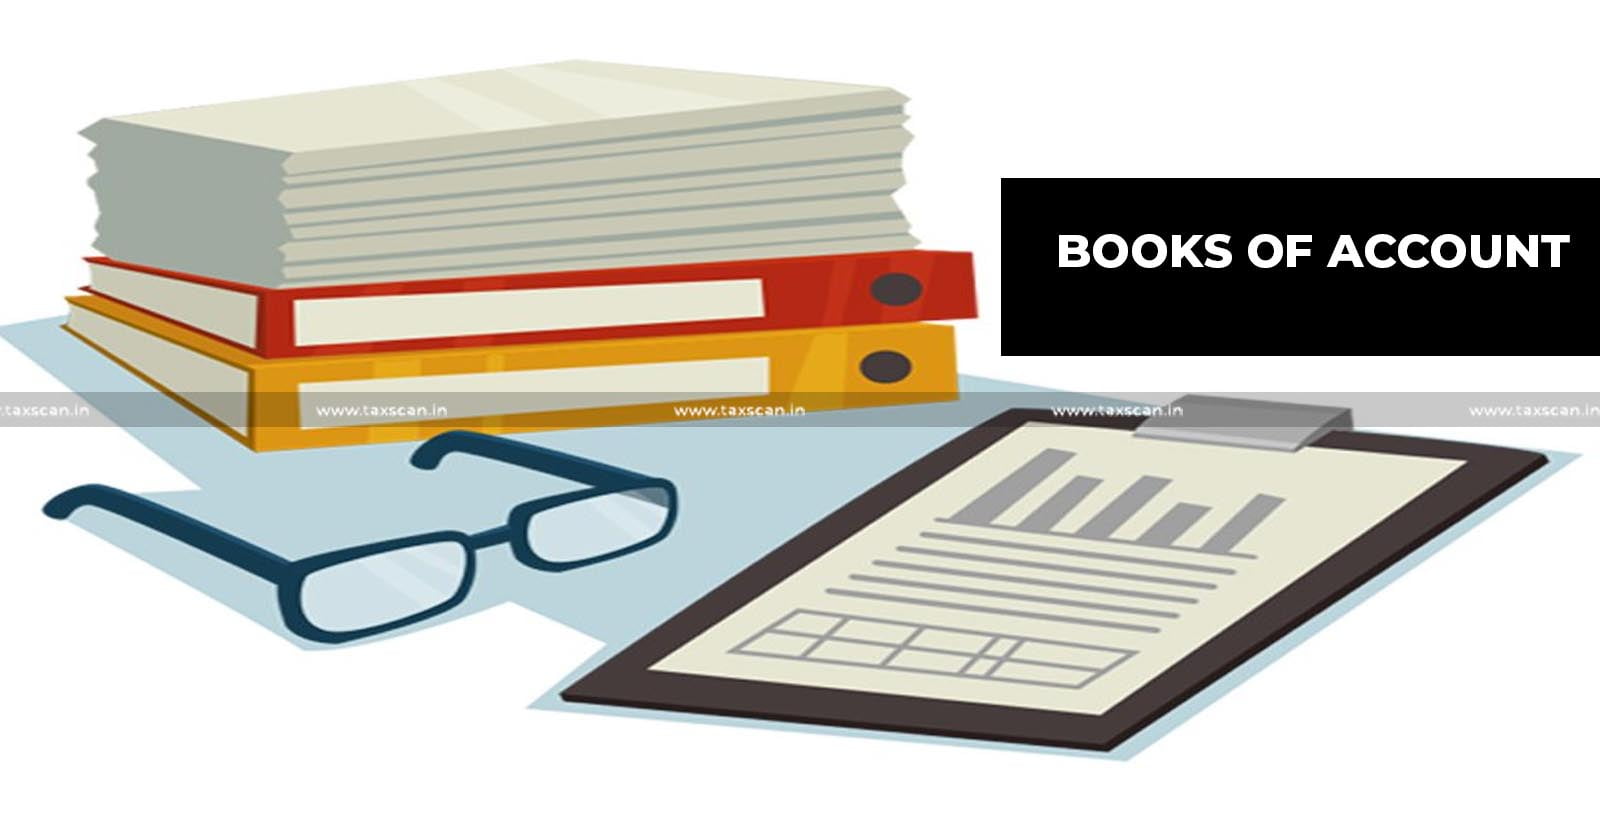 Entries in Books of Account- Books of Account - Income - ITAT - Lease Rental - taxscan